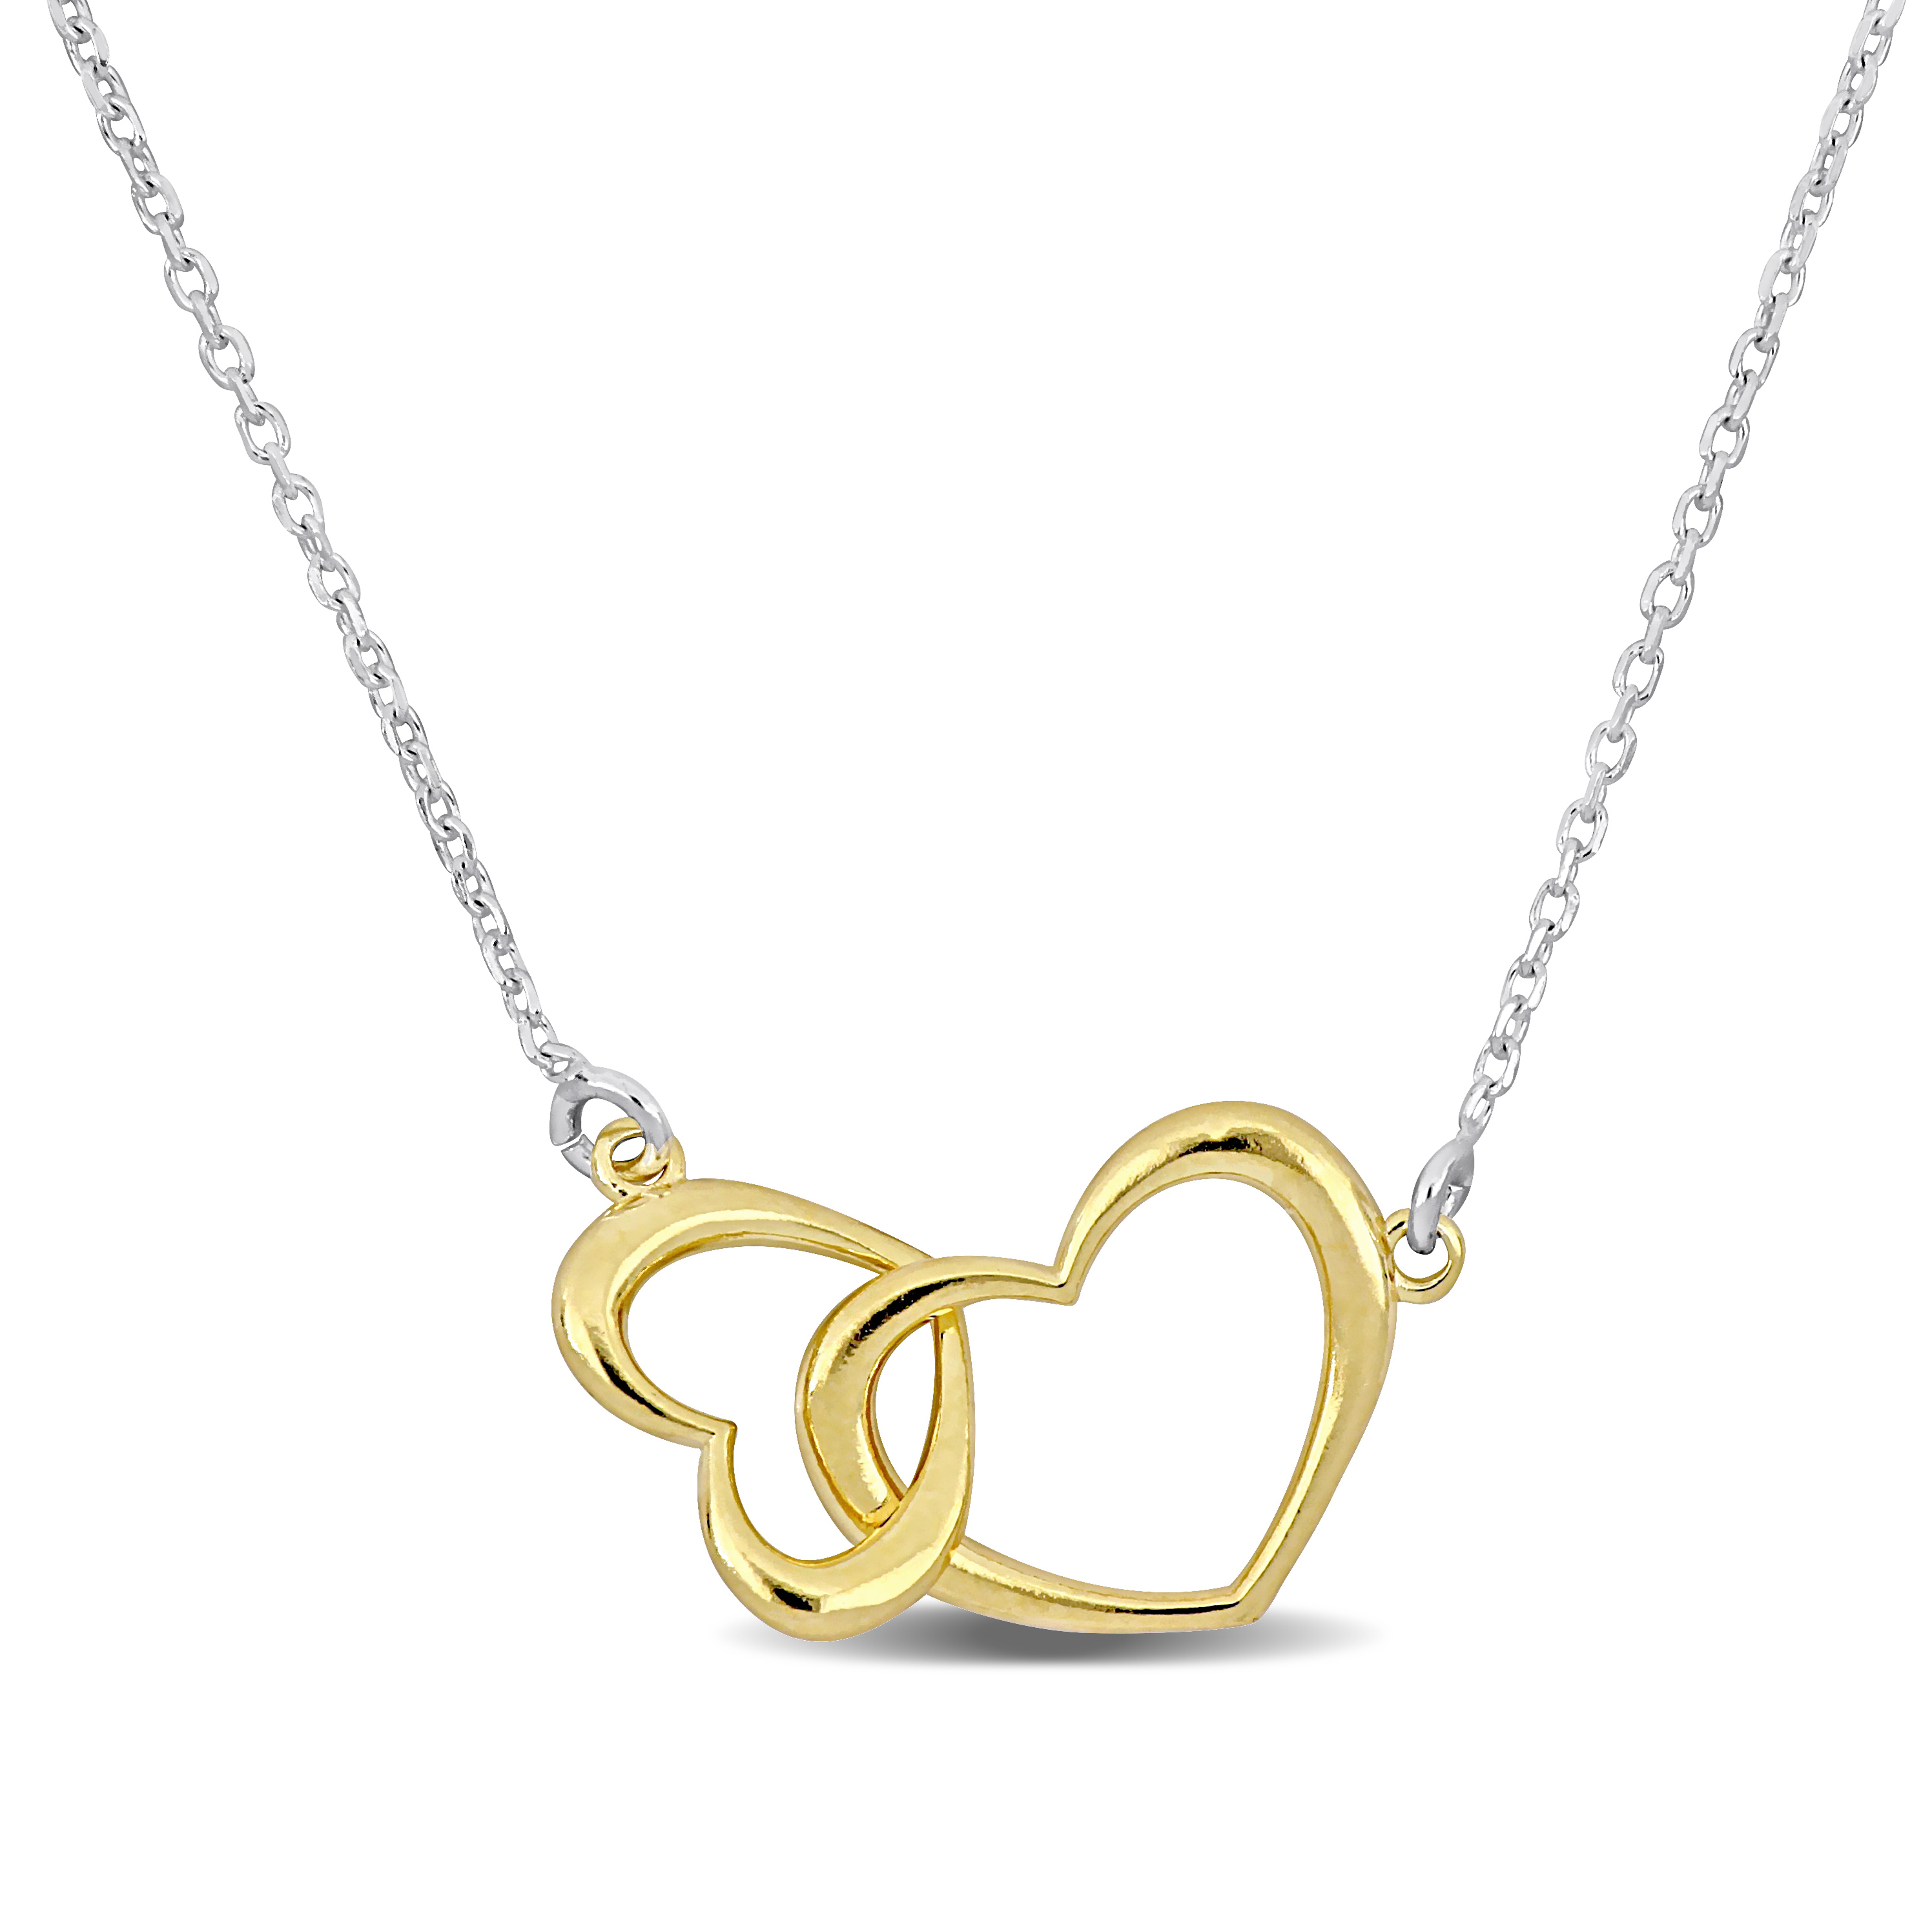 Yellow Double Heart Charm Necklace in Sterling Silver - 16.5 +1 in.